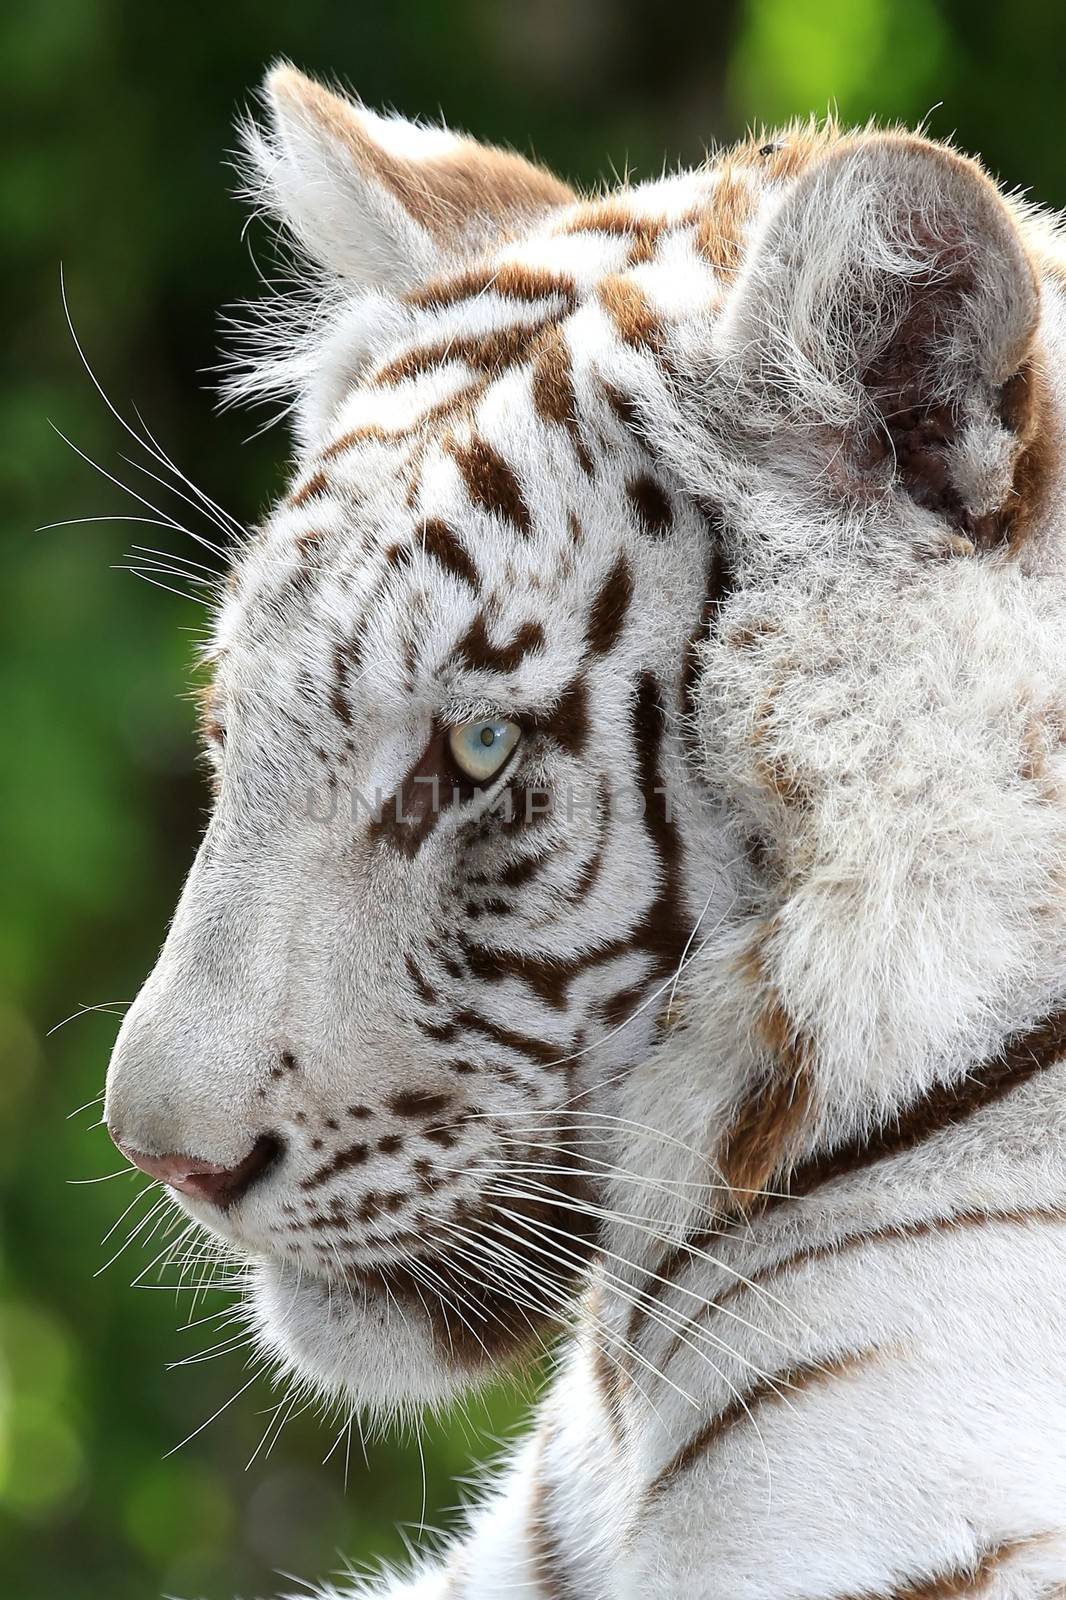 White tiger with black stripes and long whiskers